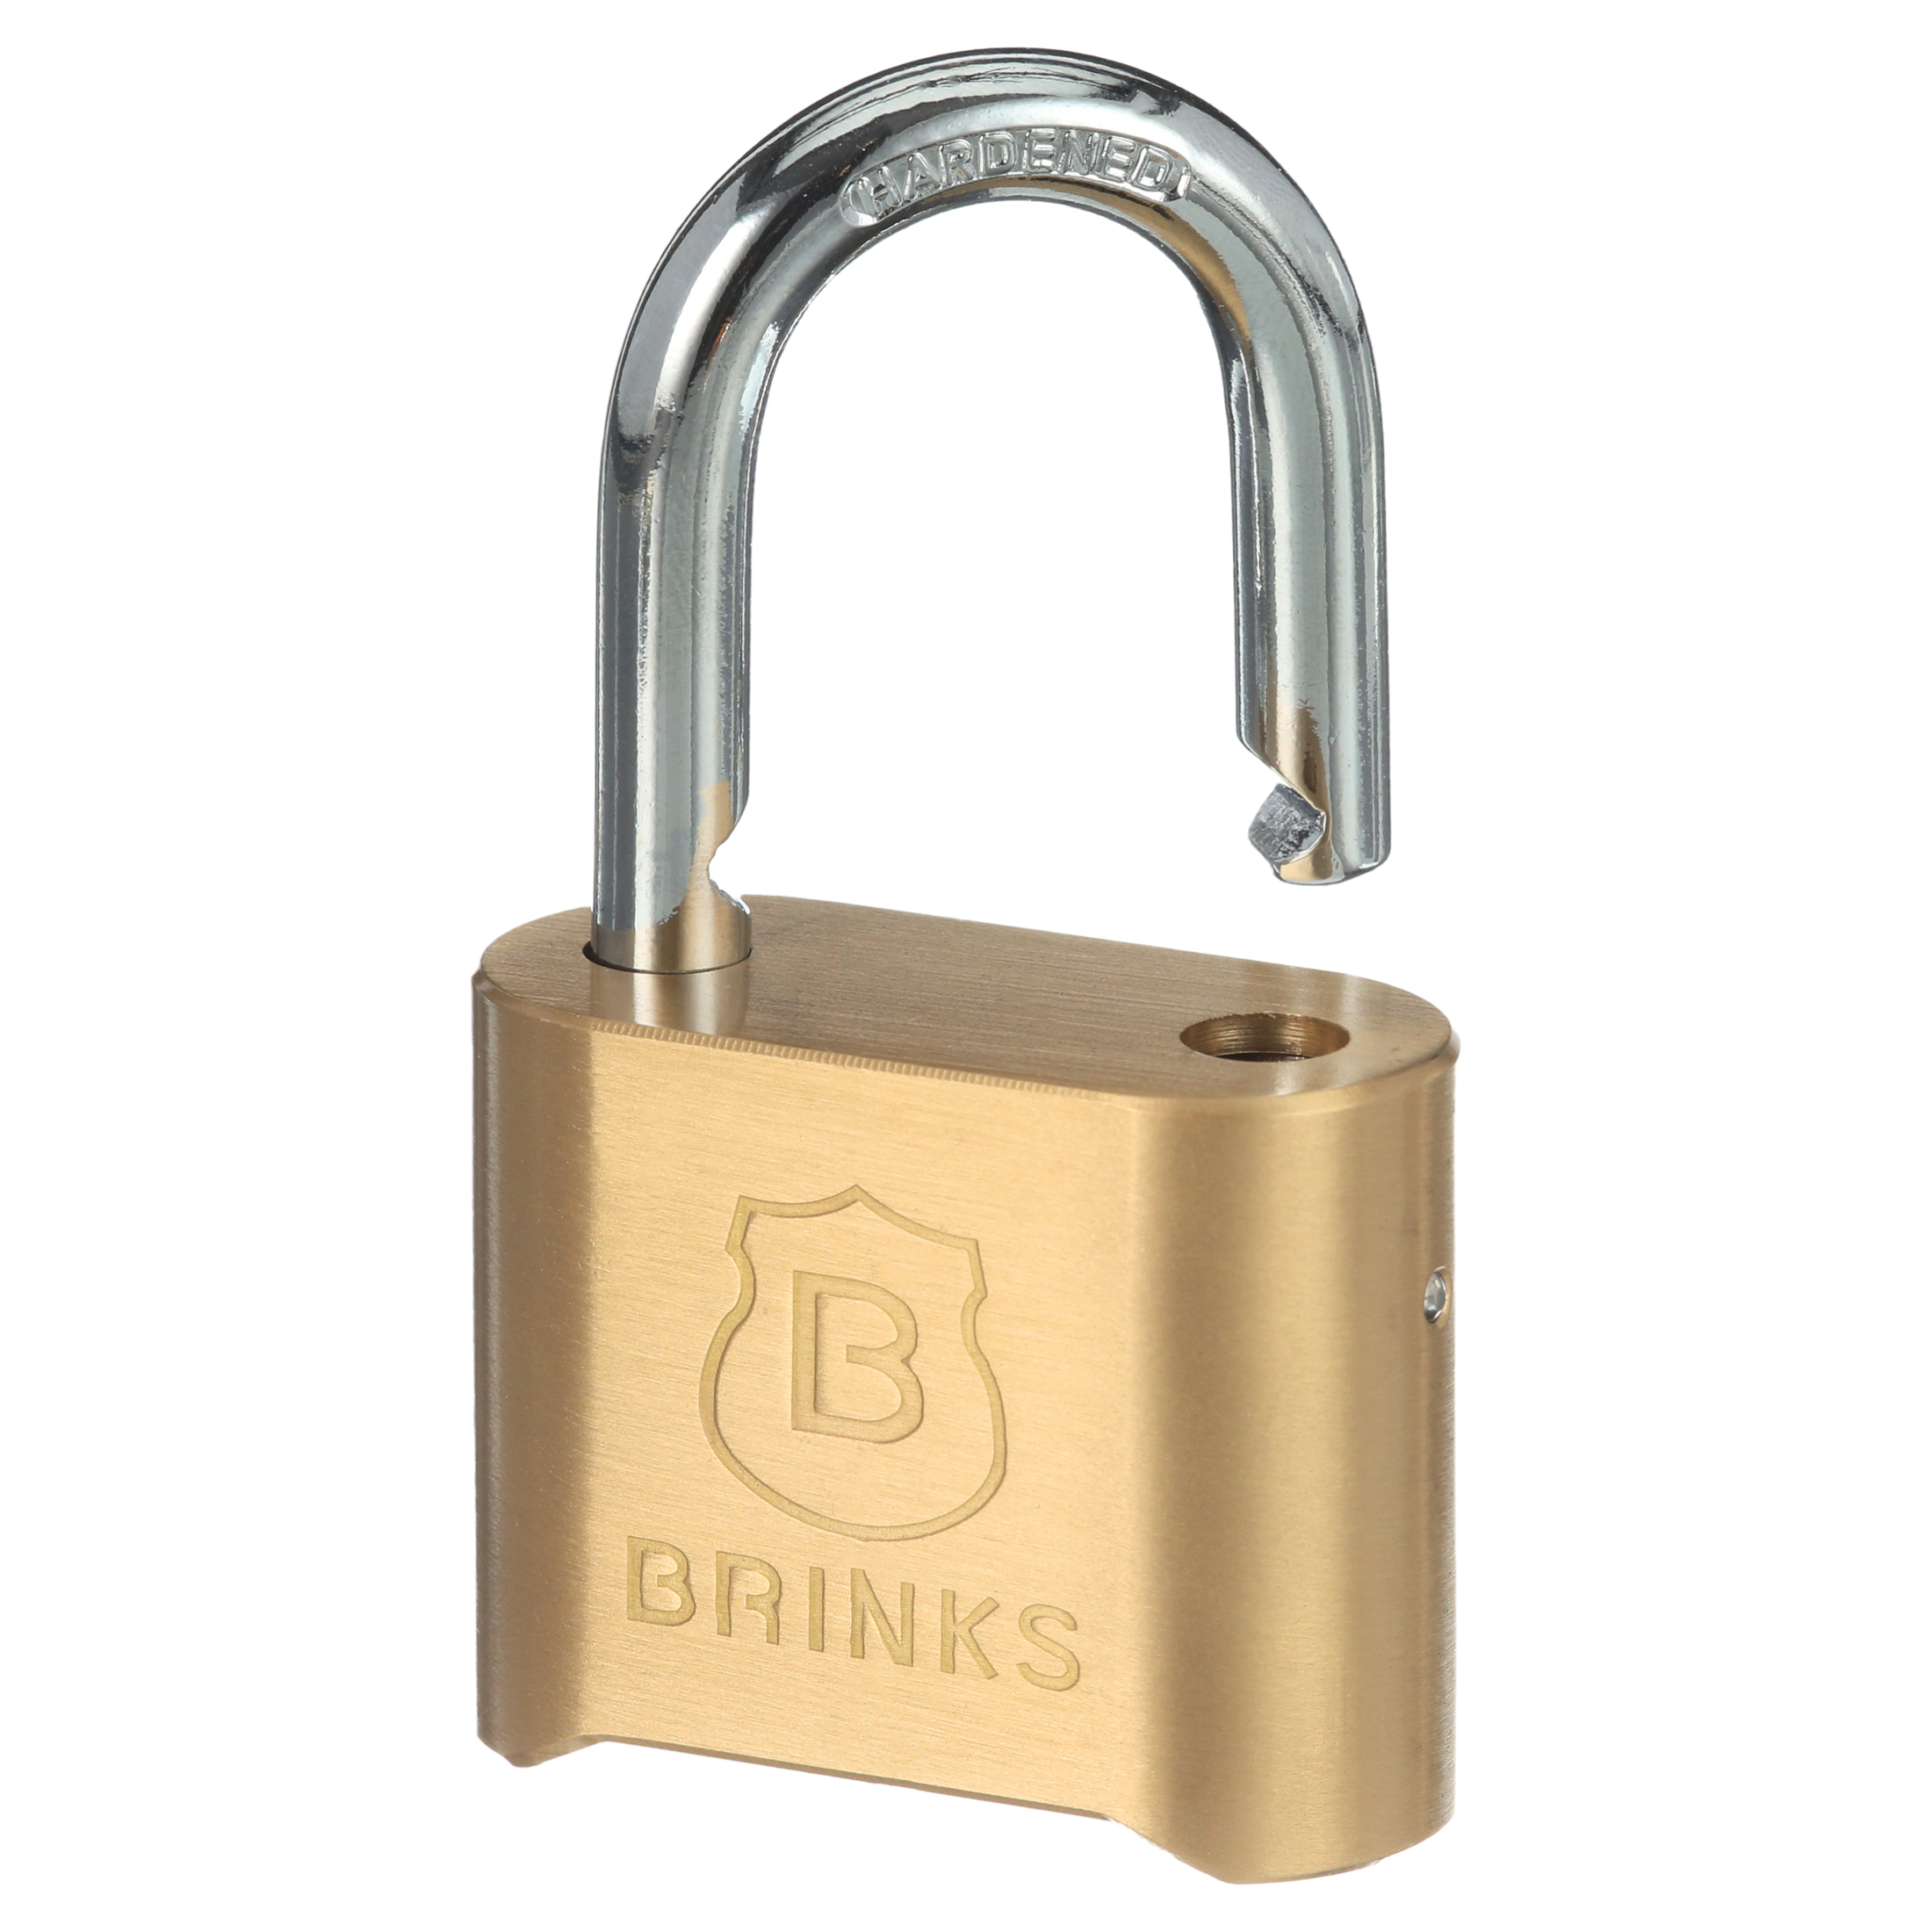 Brinks Solid Brass 50mm Resettable Combination Padlock with 1in Shackle - image 4 of 7